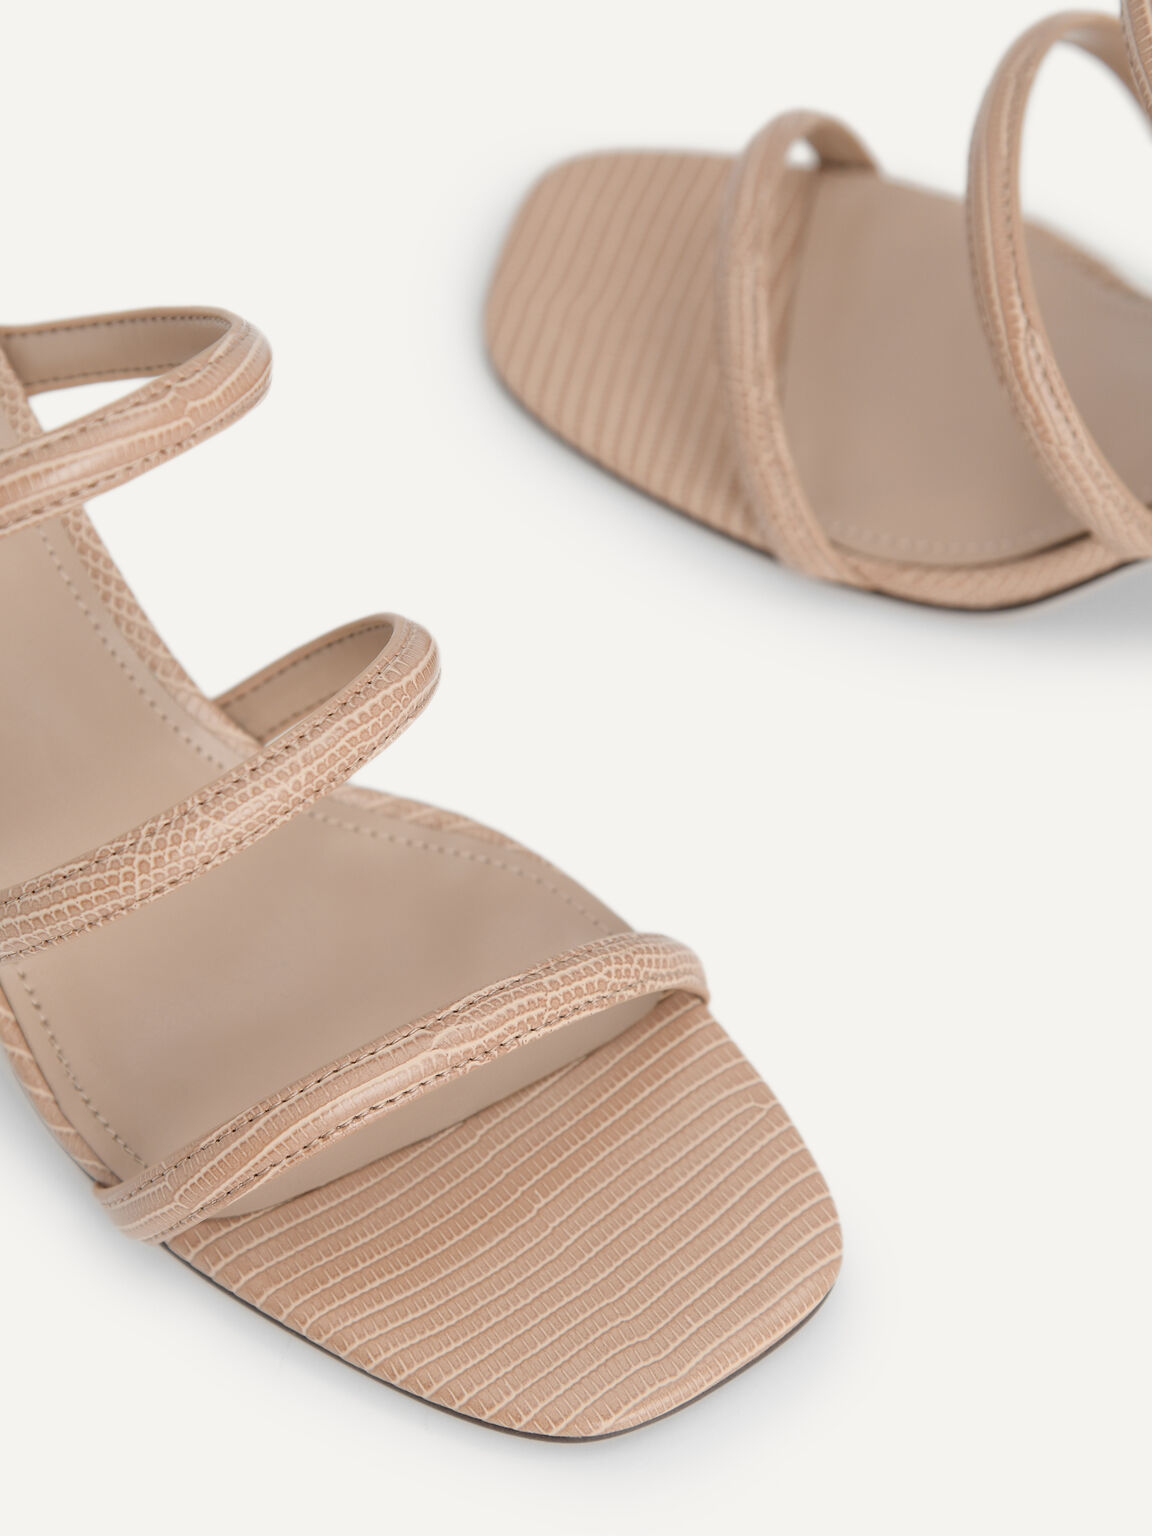 Strappy Heeled Lizard-Effect Sandals, Taupe, hi-res